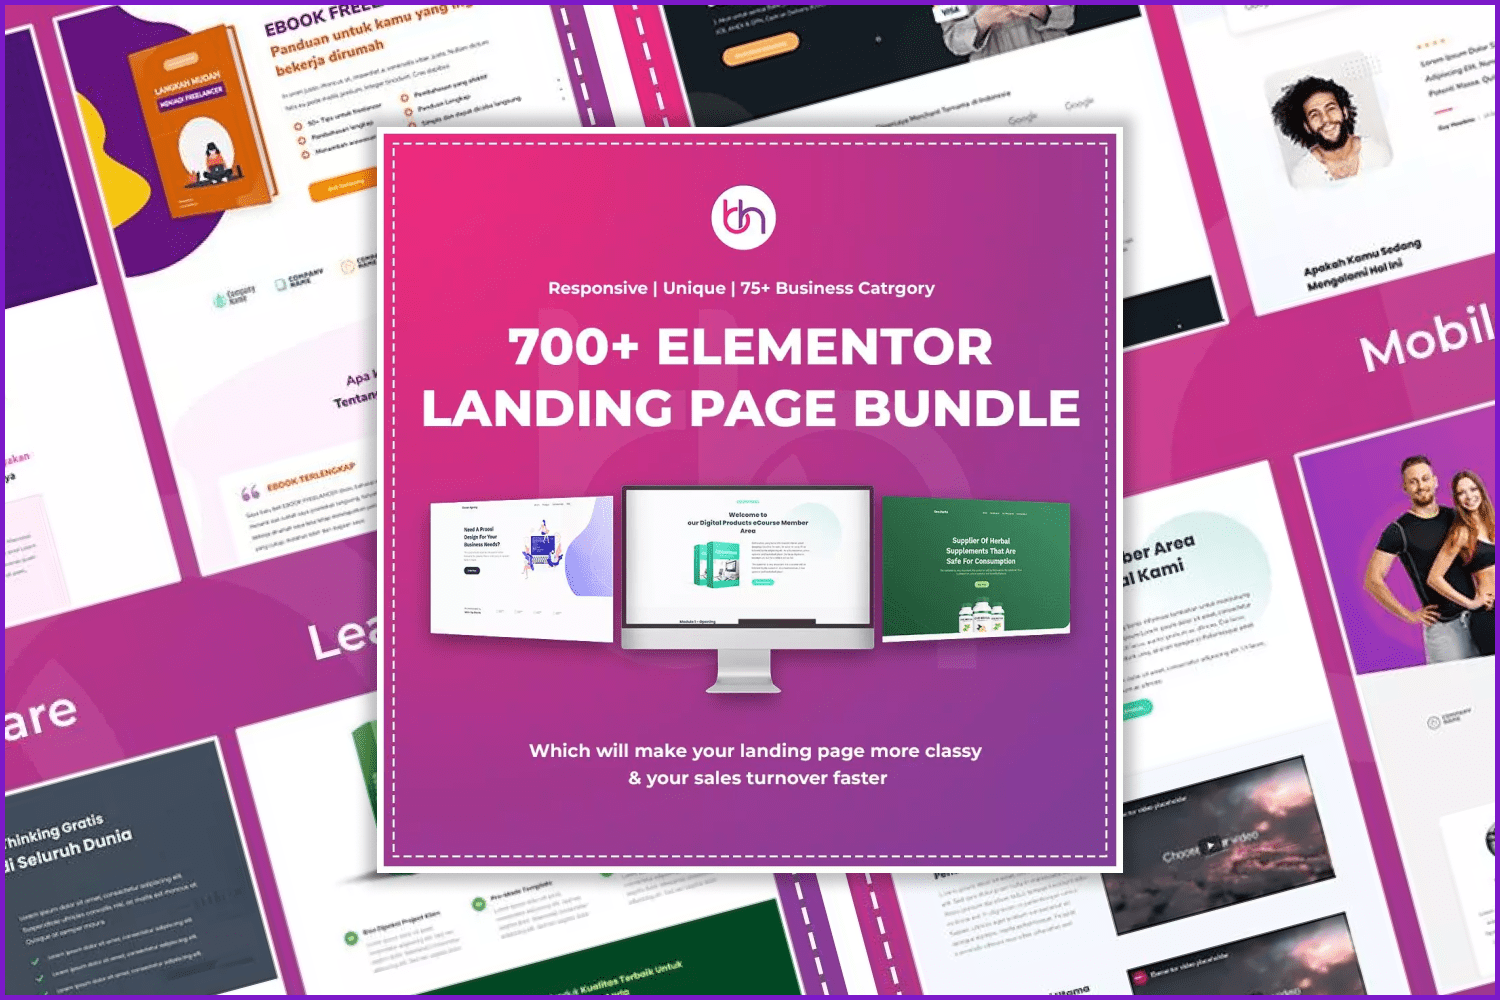 Collage of landing page screenshots.